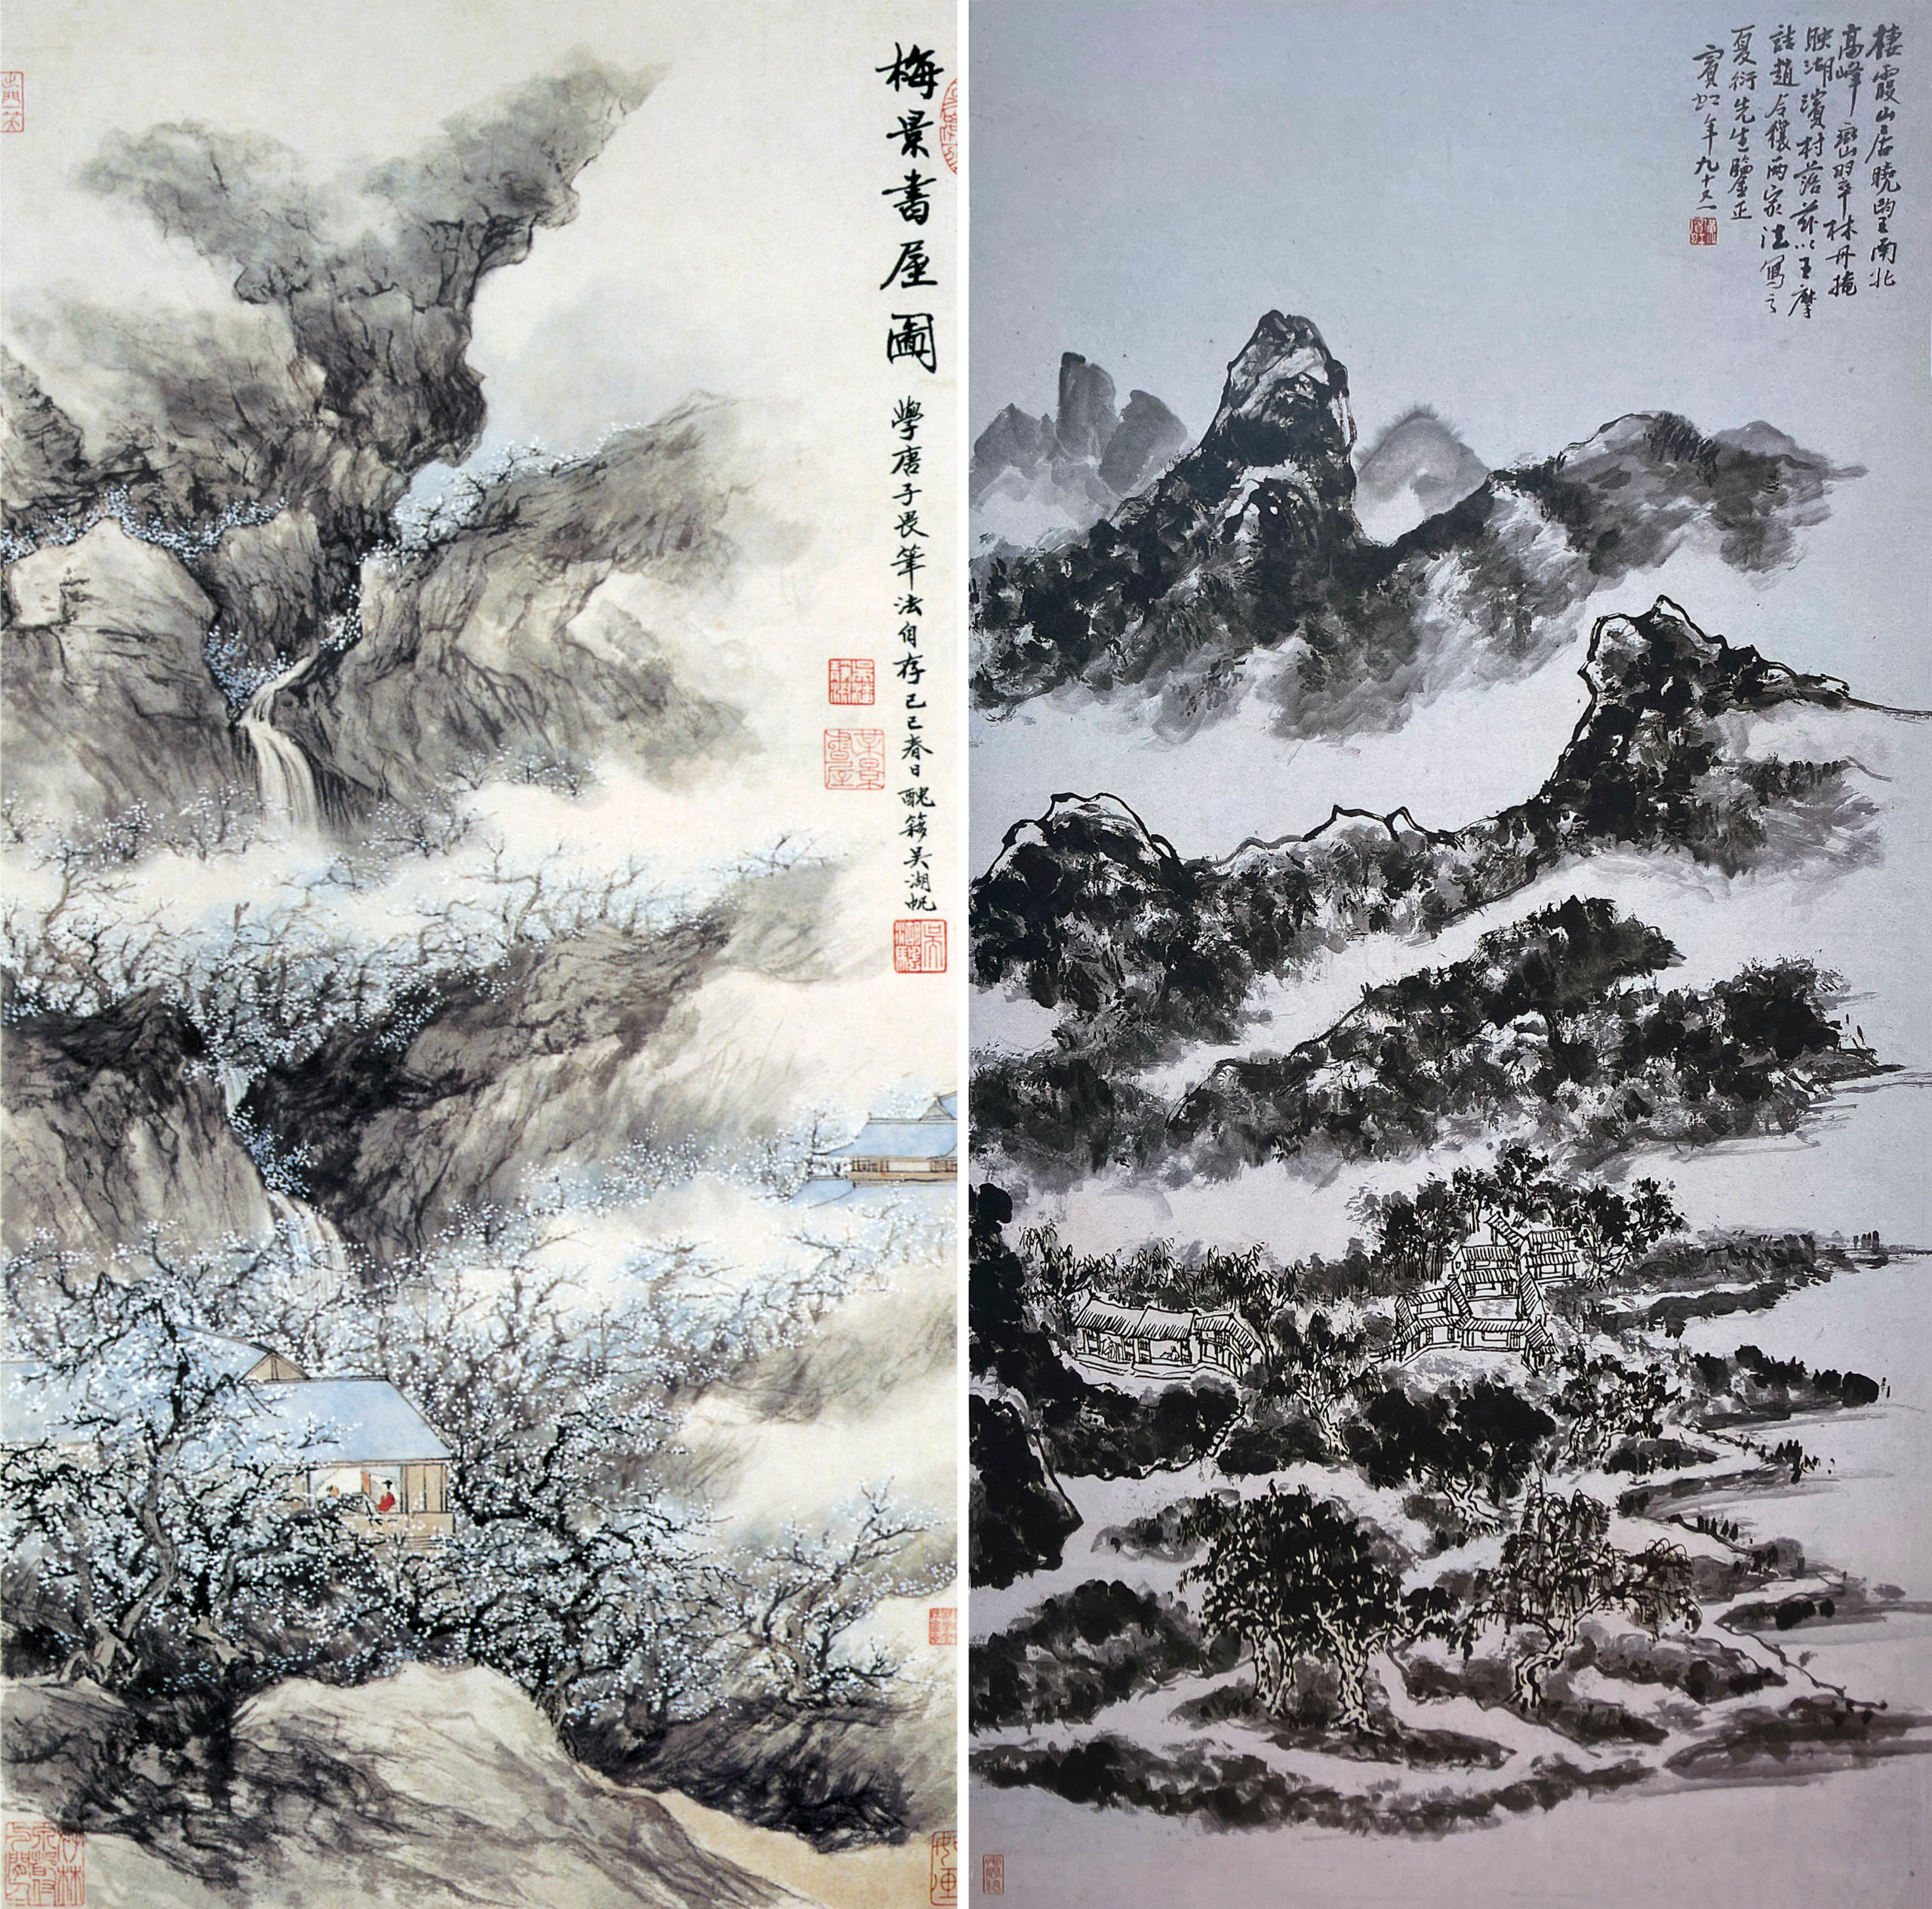 Left: Wu Hufan, Meiying Studio, 1929, ink on paper (hanging scroll) (Shanghai Museum, China); right: Huang Binhong, Dwelling in the Xixia Mountains, 1954, ink on paper (hanging scroll), China, 120.7 × 60.3 cm (The Metropolitan Museum of Art)